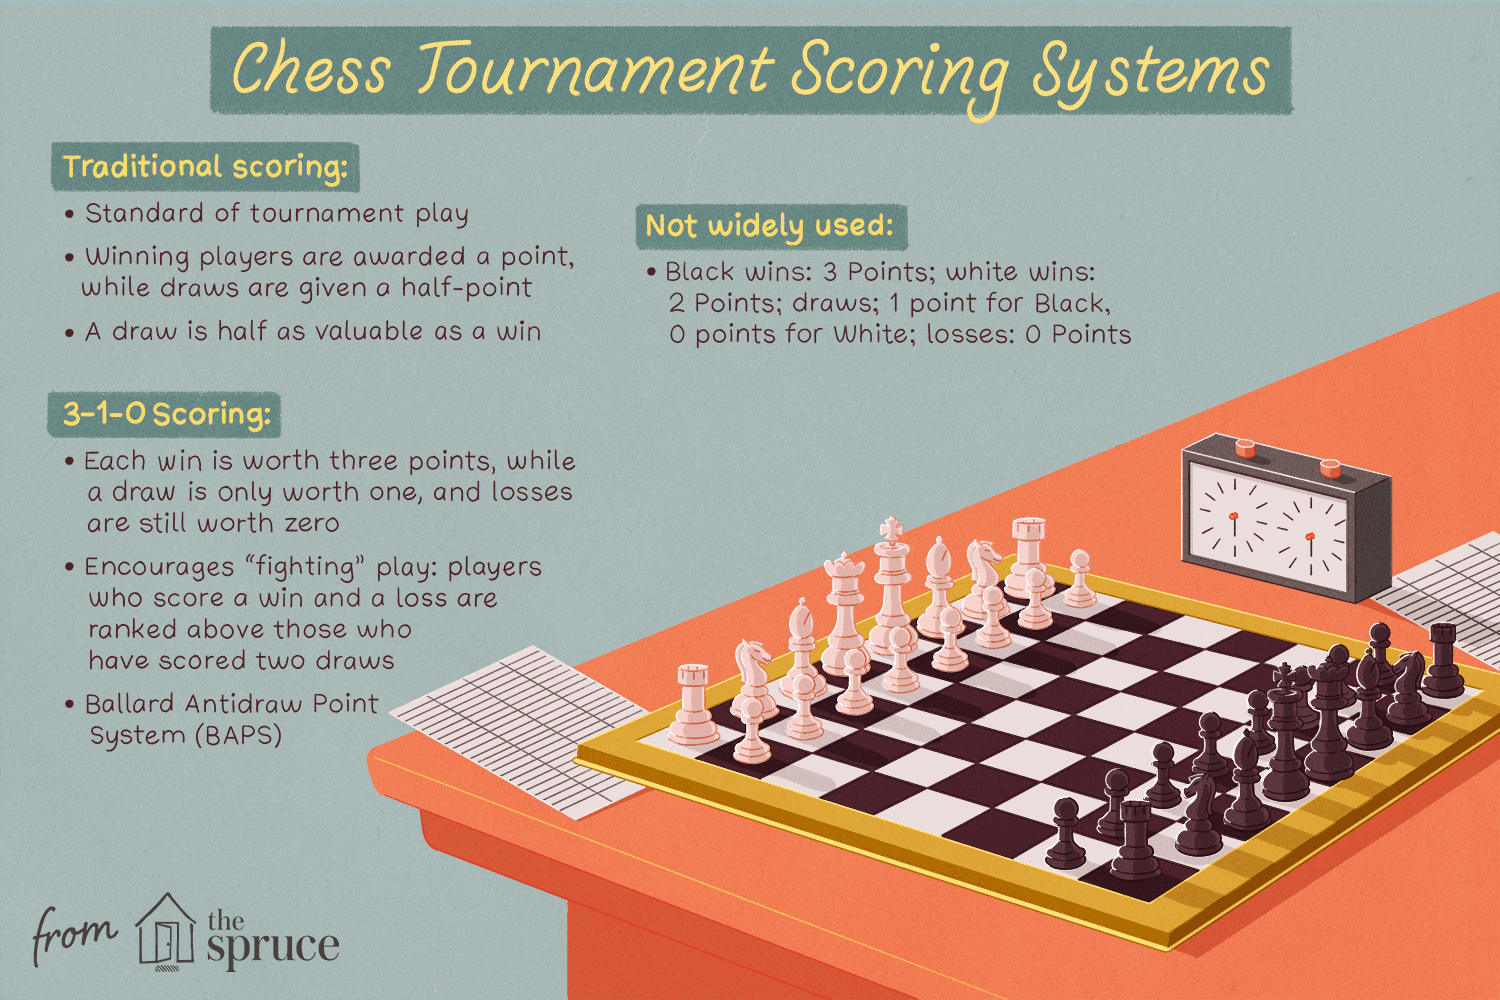 Illustration of chess tournament scoring systems